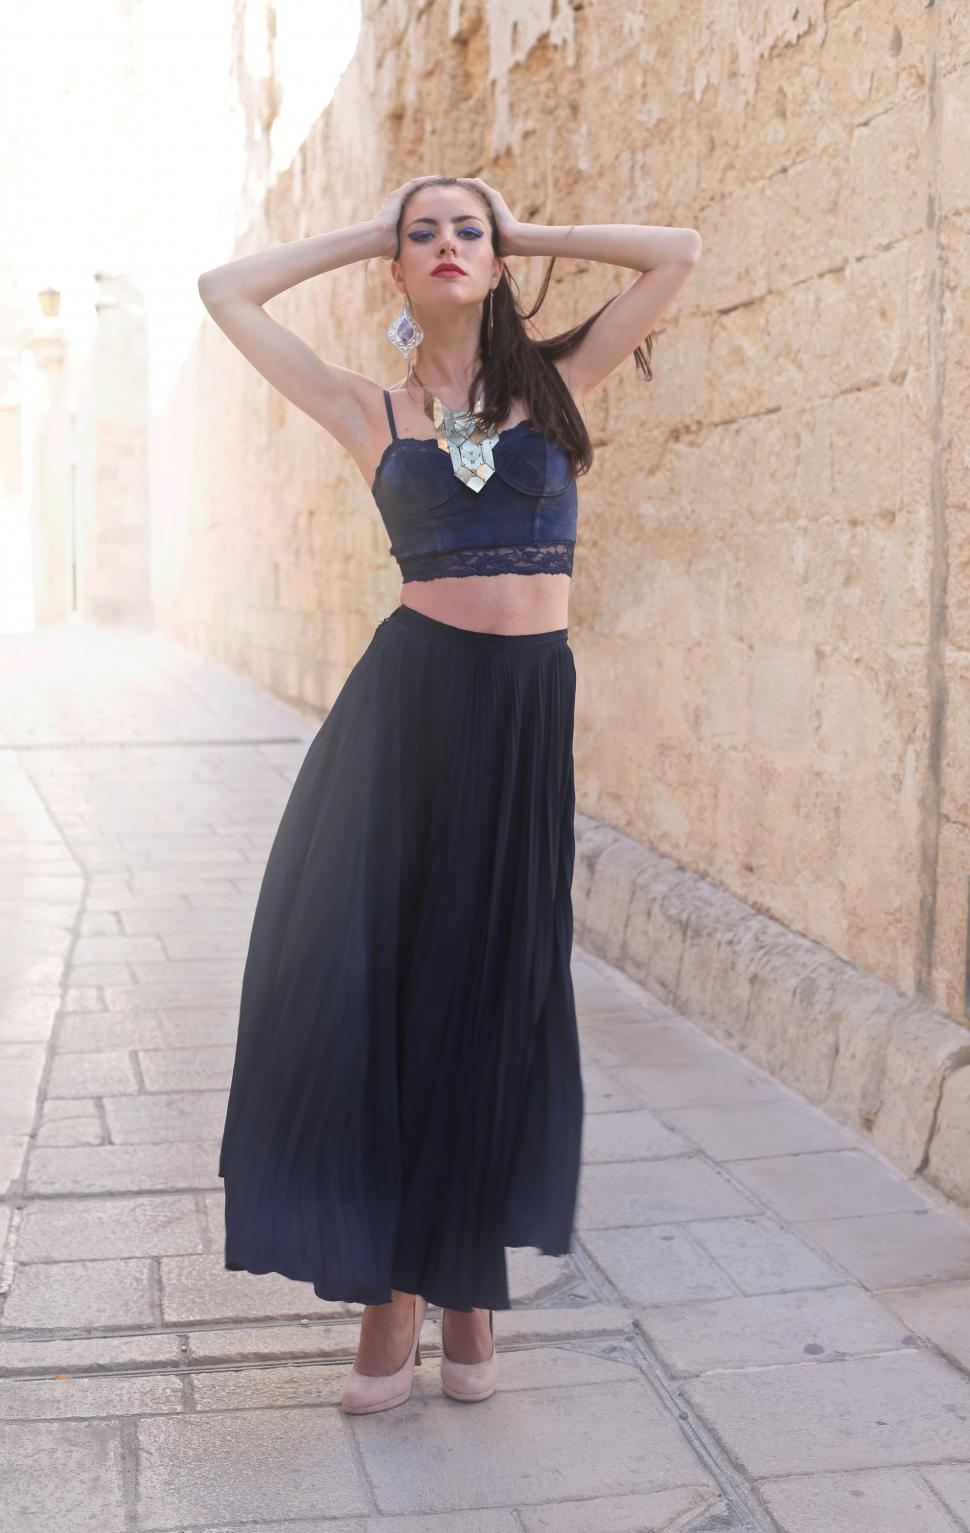 Long Skirt Photos Download The BEST Free Long Skirt Stock Photos  HD  Images